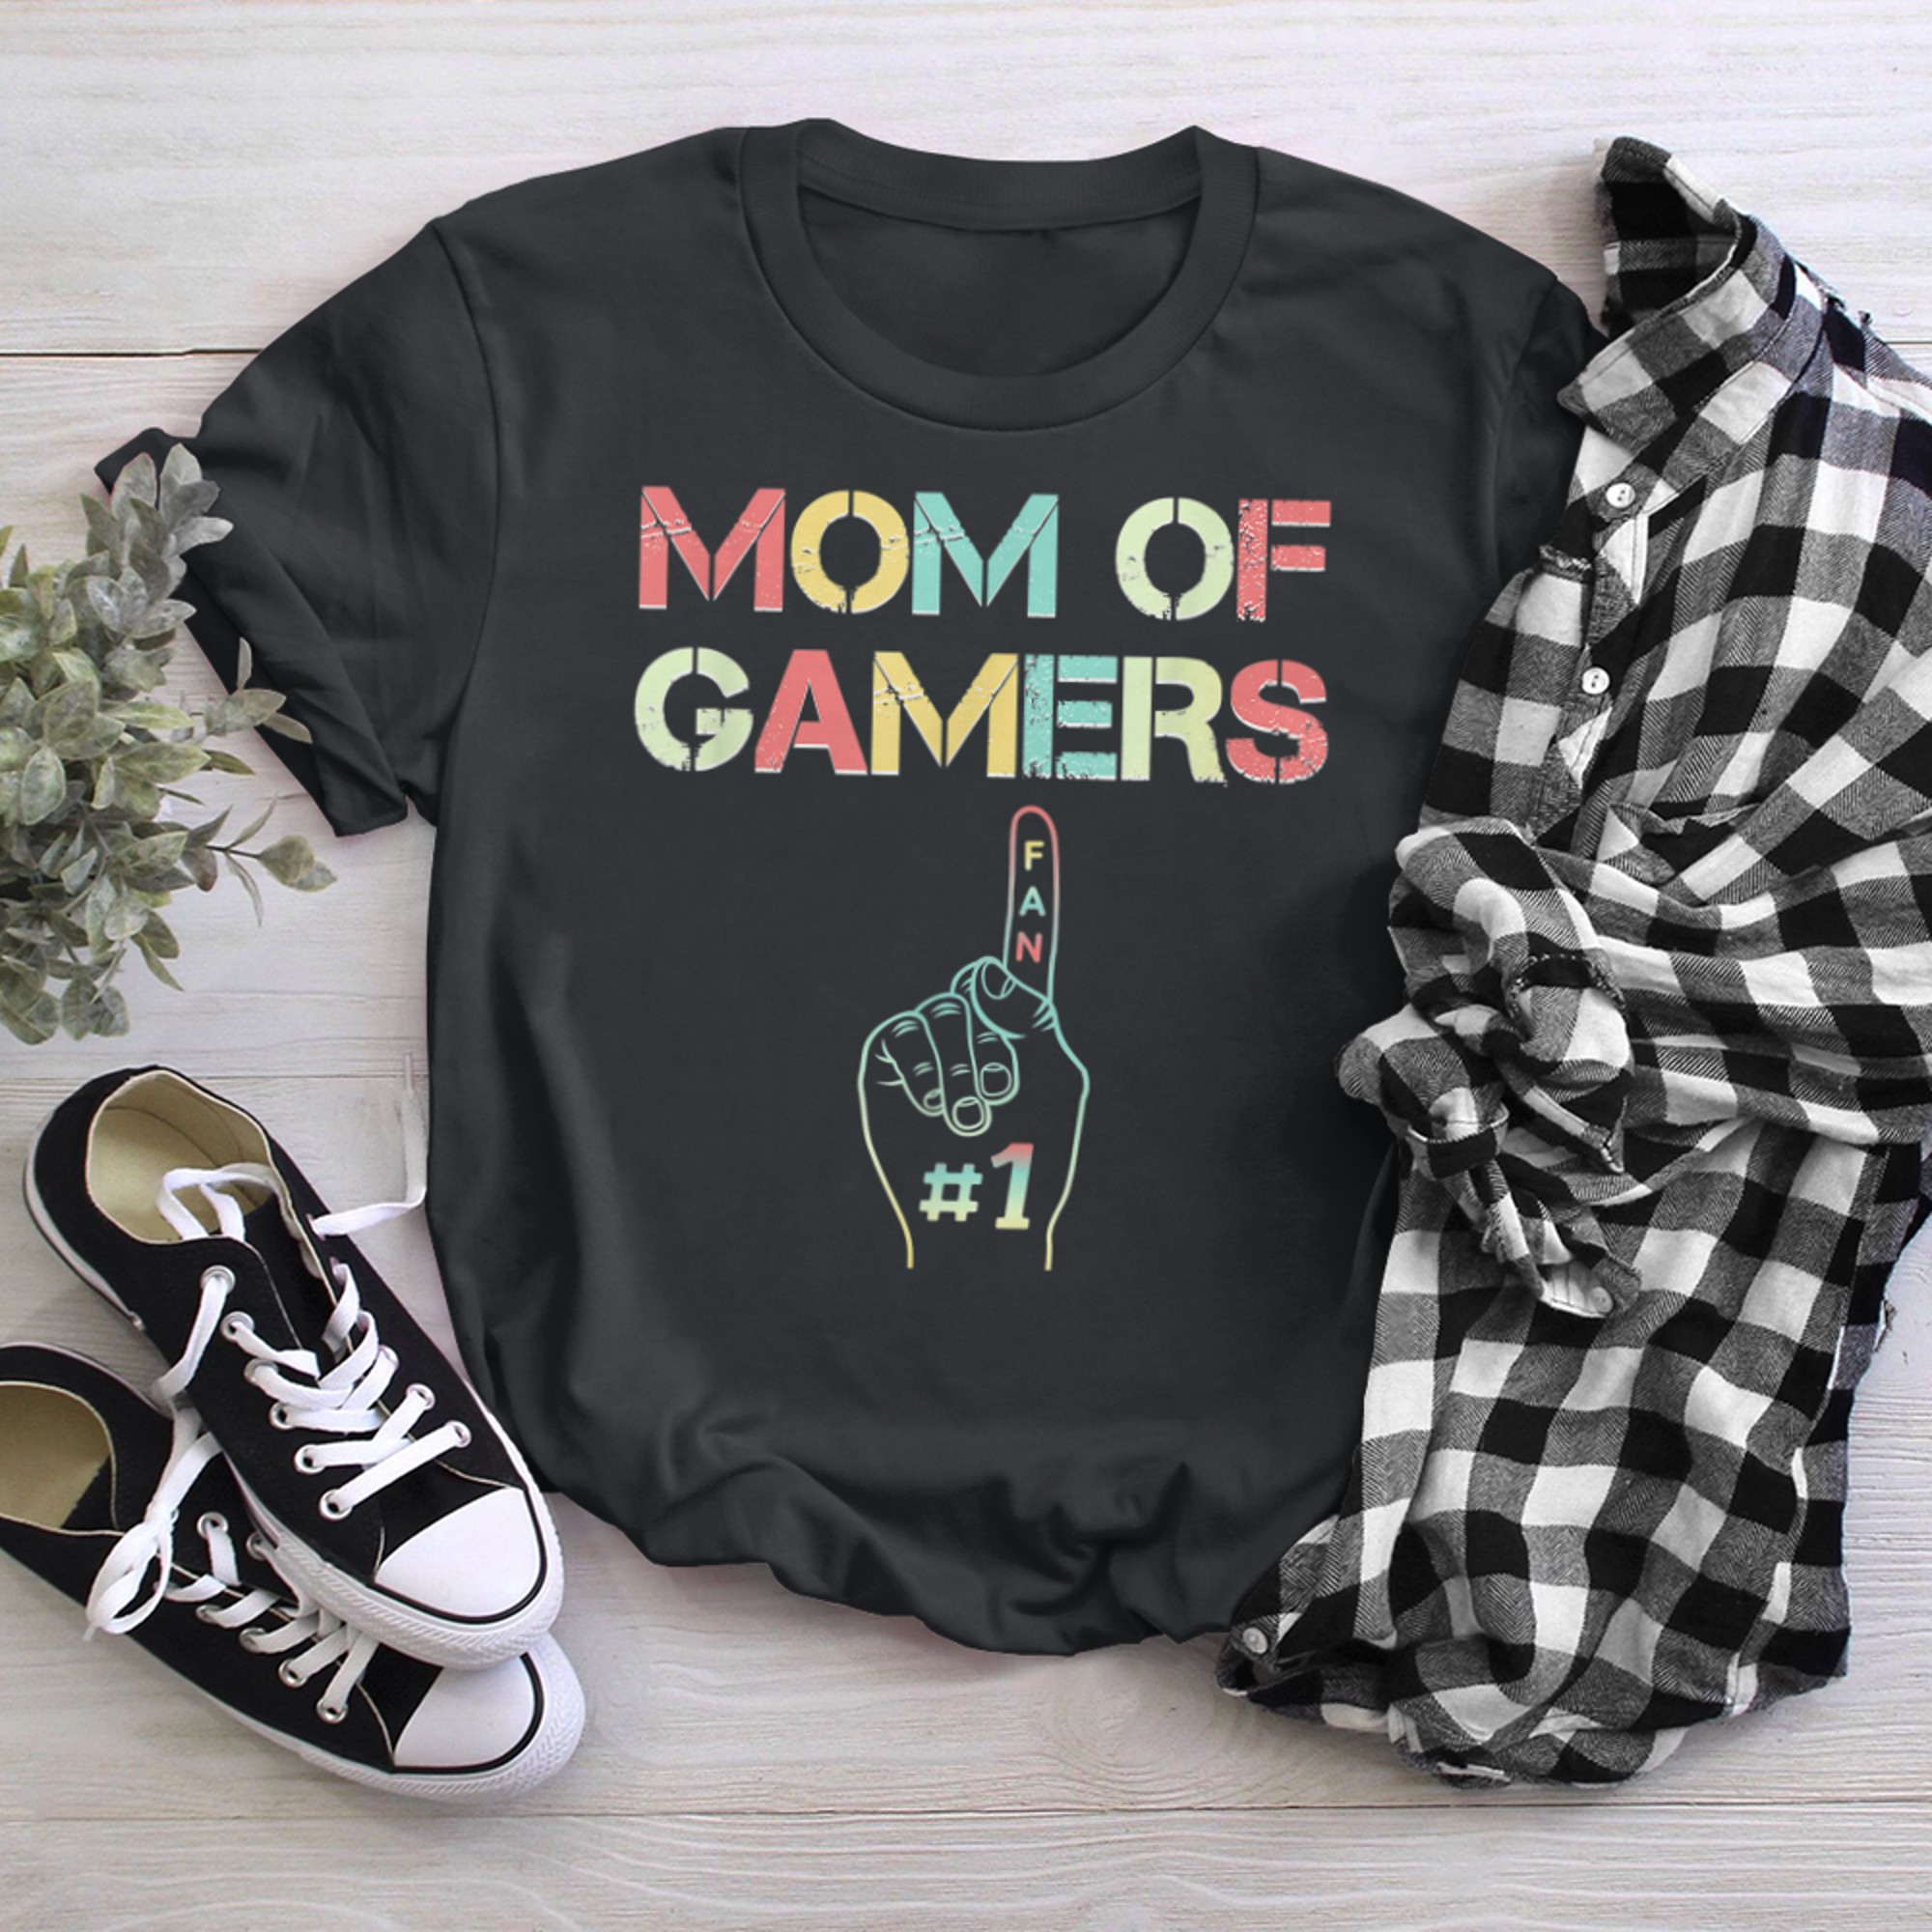 Mom of Gamers Mom Number Fan gamers funny gaming mom t-shirt black